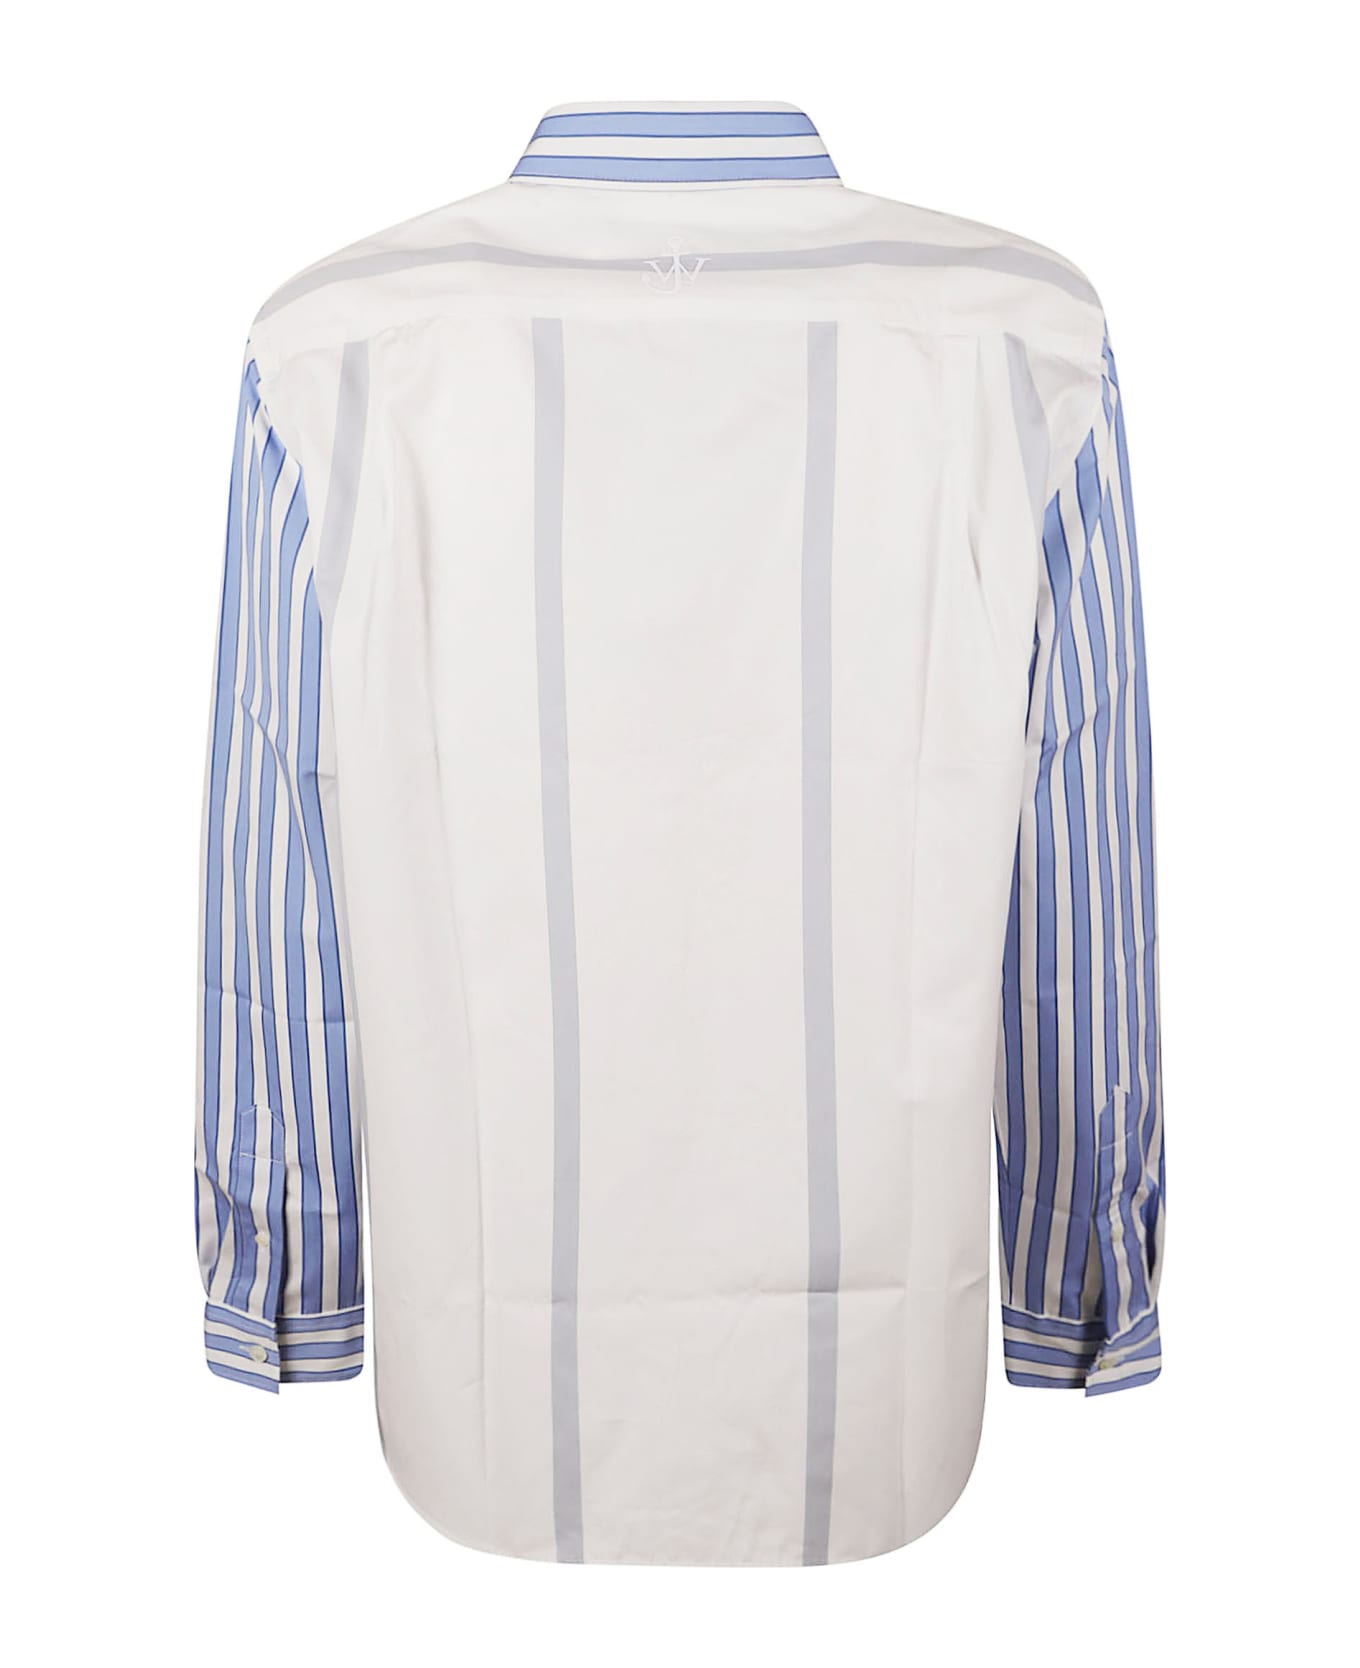 J.W. Anderson Classic Fit Patchwork Shirt - Blue/White